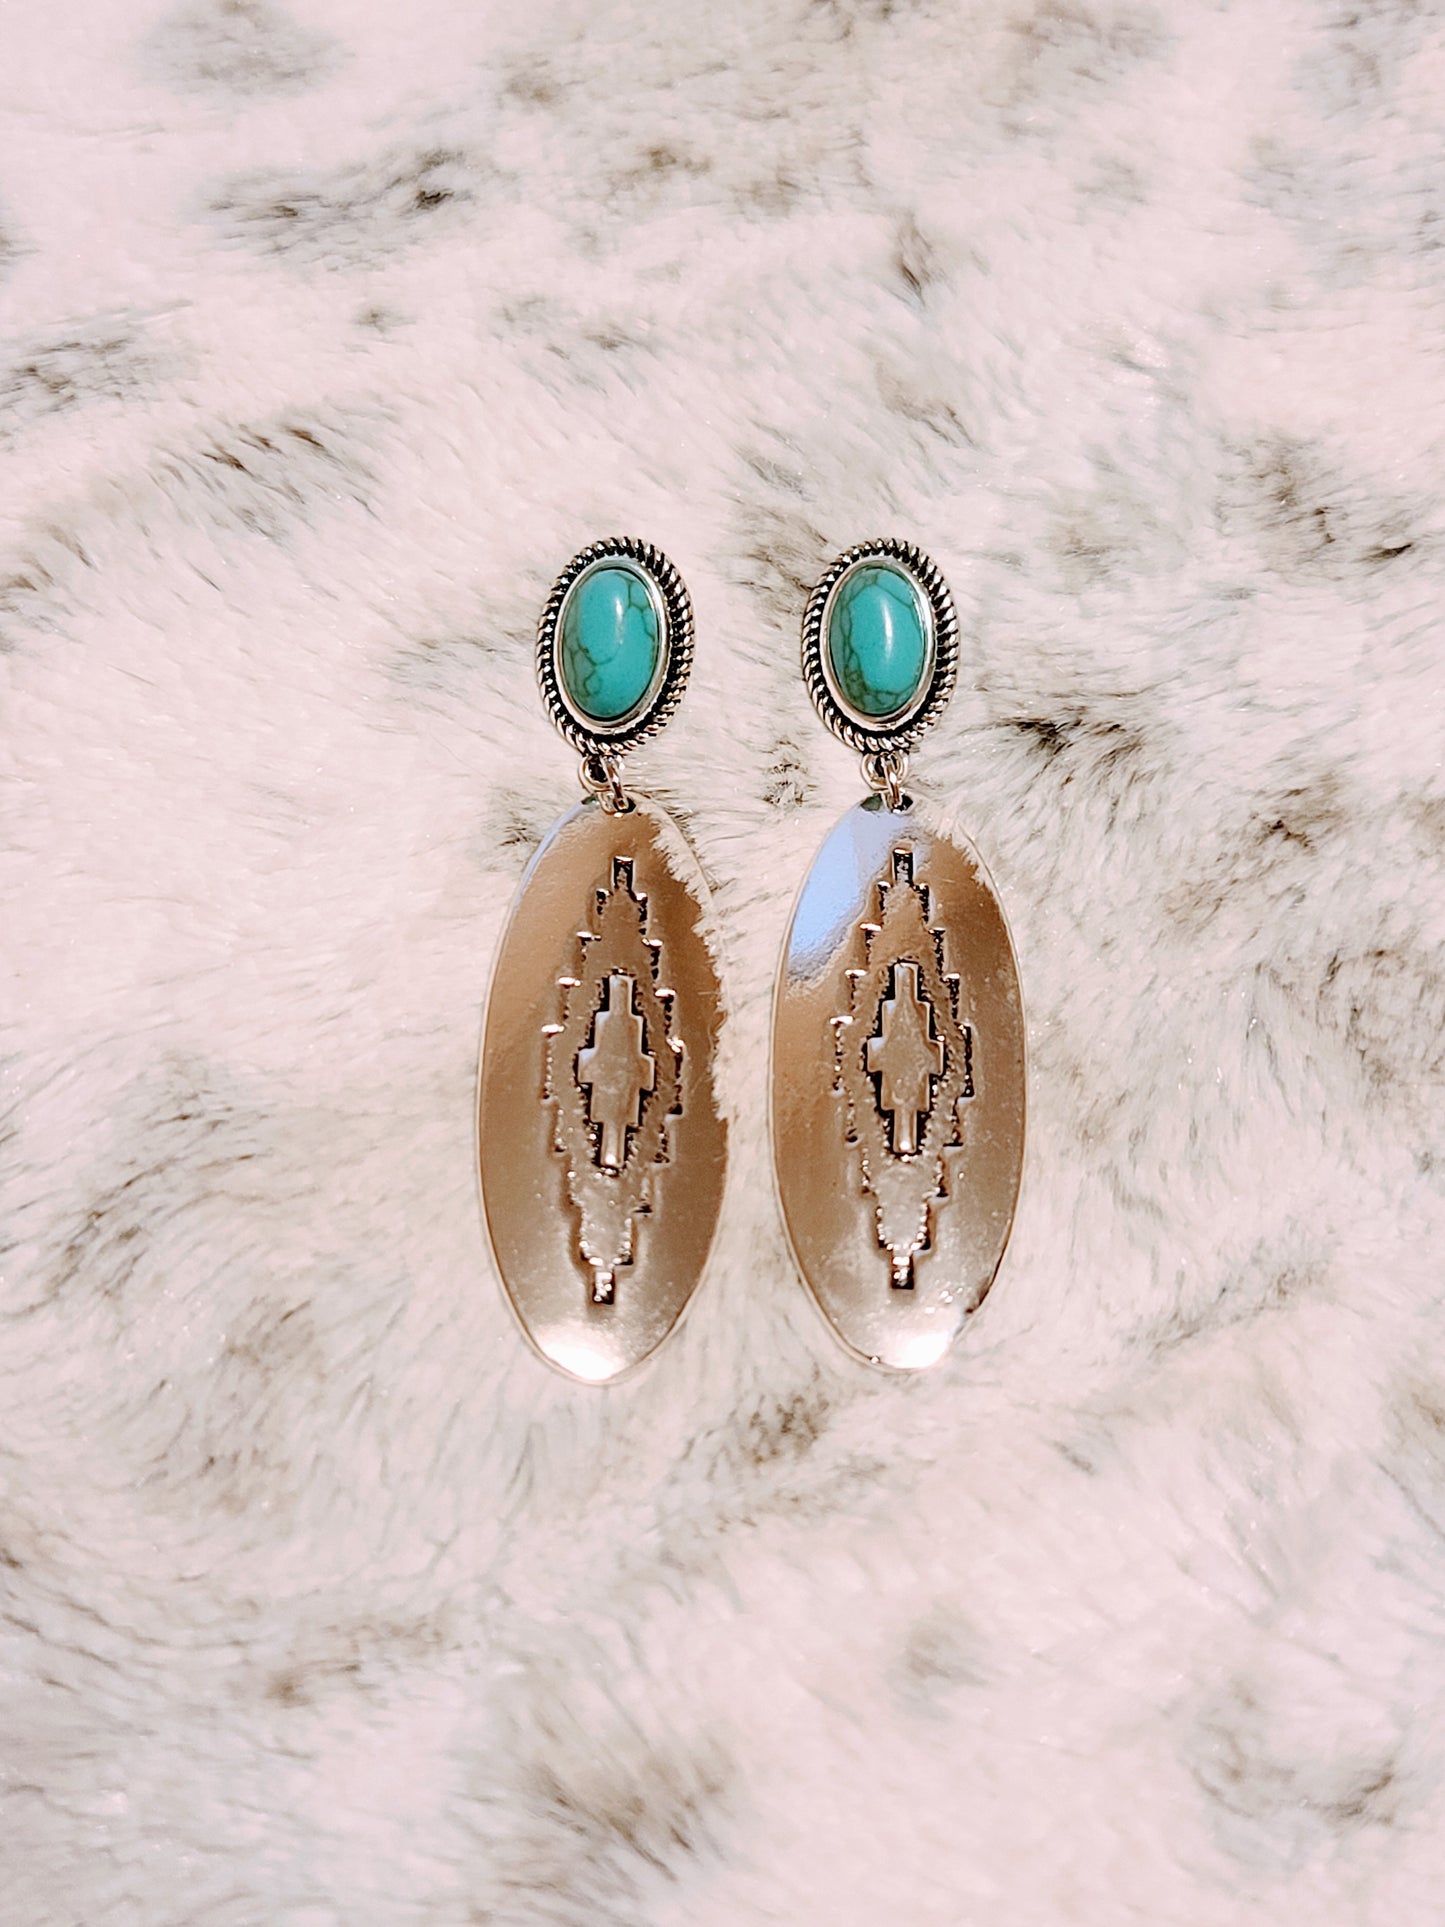 Oval Aztec Stamped Earrings on Turquoise Post